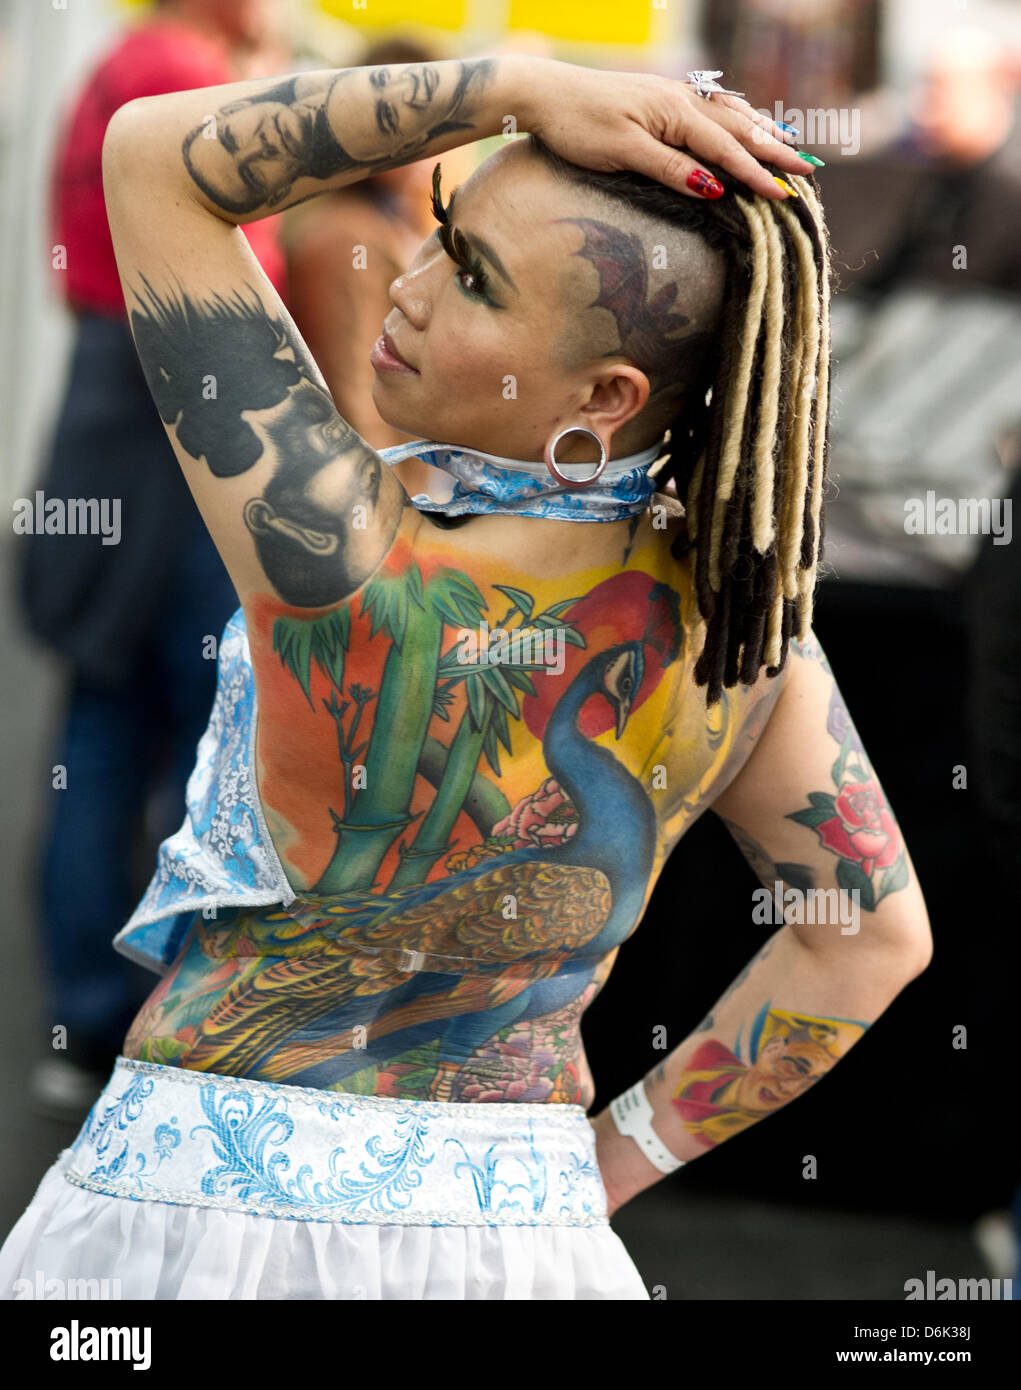 DVIDS - Images - El Paso hosts world's largest tattoo and music festival  [Image 1 of 9]